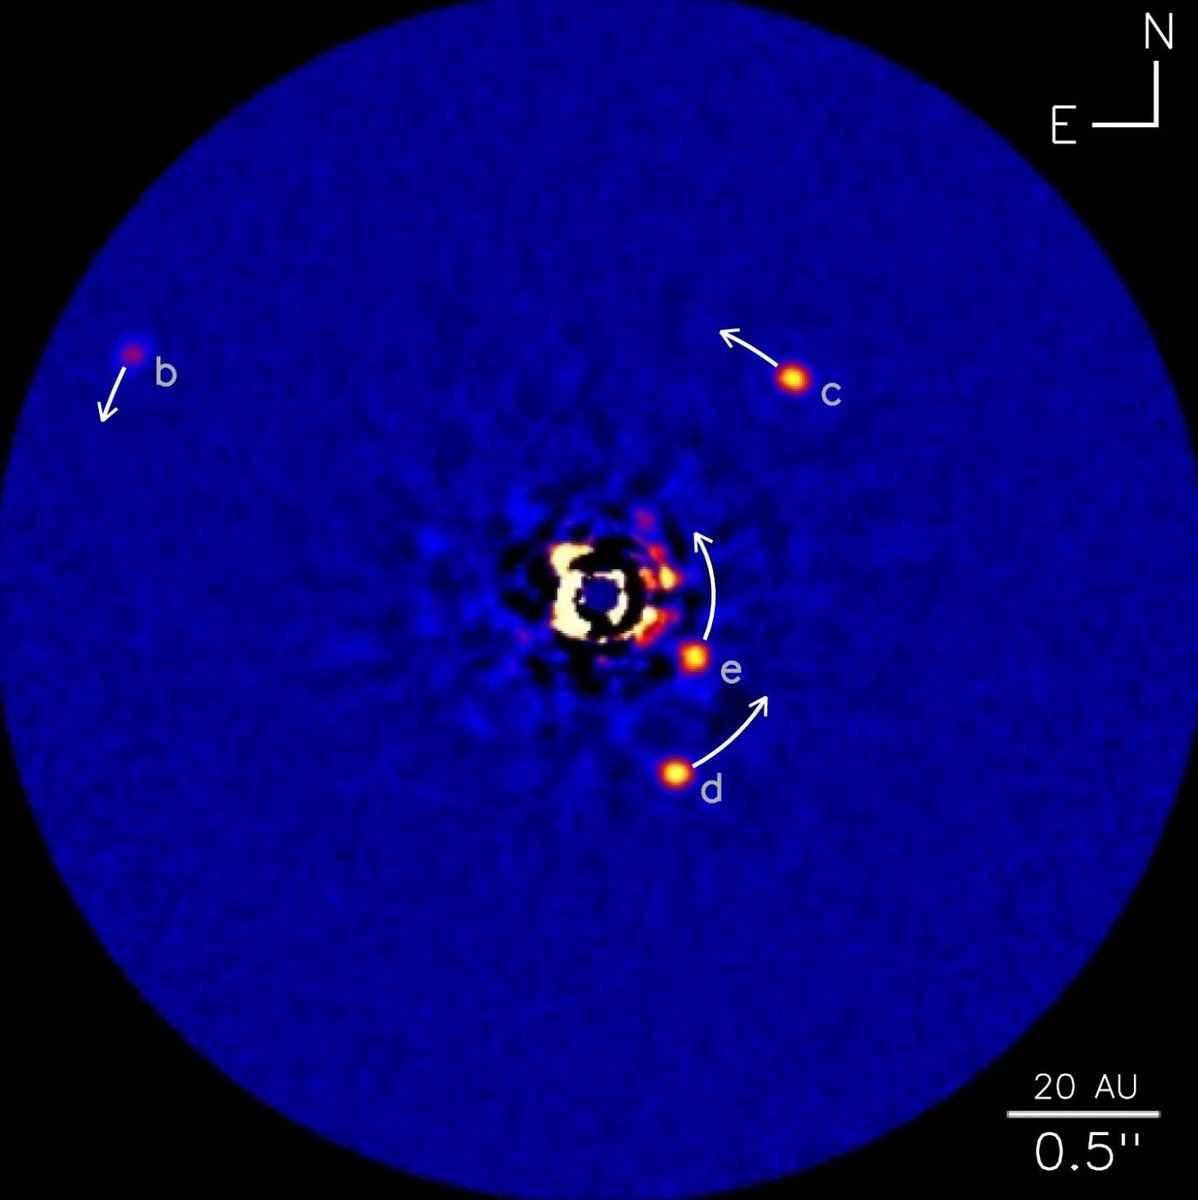 The HR 8799 system contains the first exoplanet be directly imaged. 